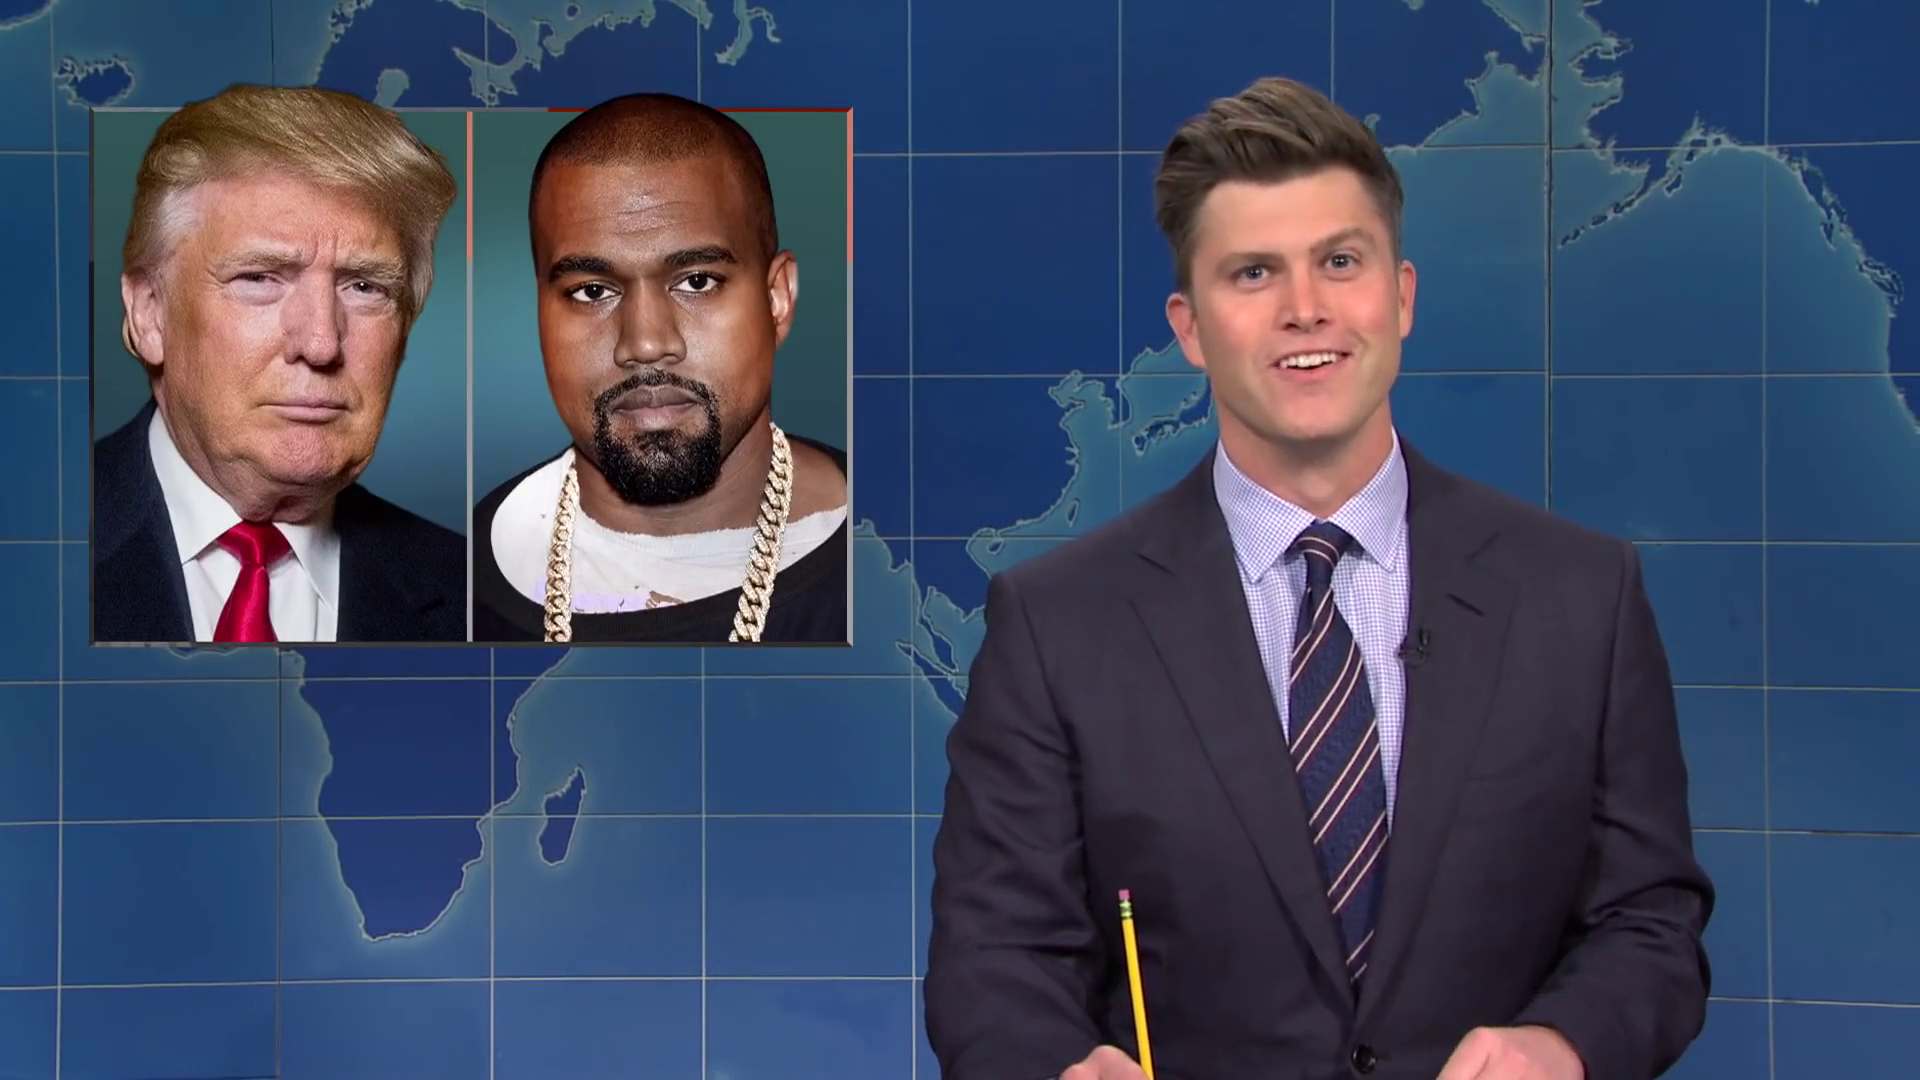 SNL's Colin Jost Looks Forward To Never Having To Listen To Donald